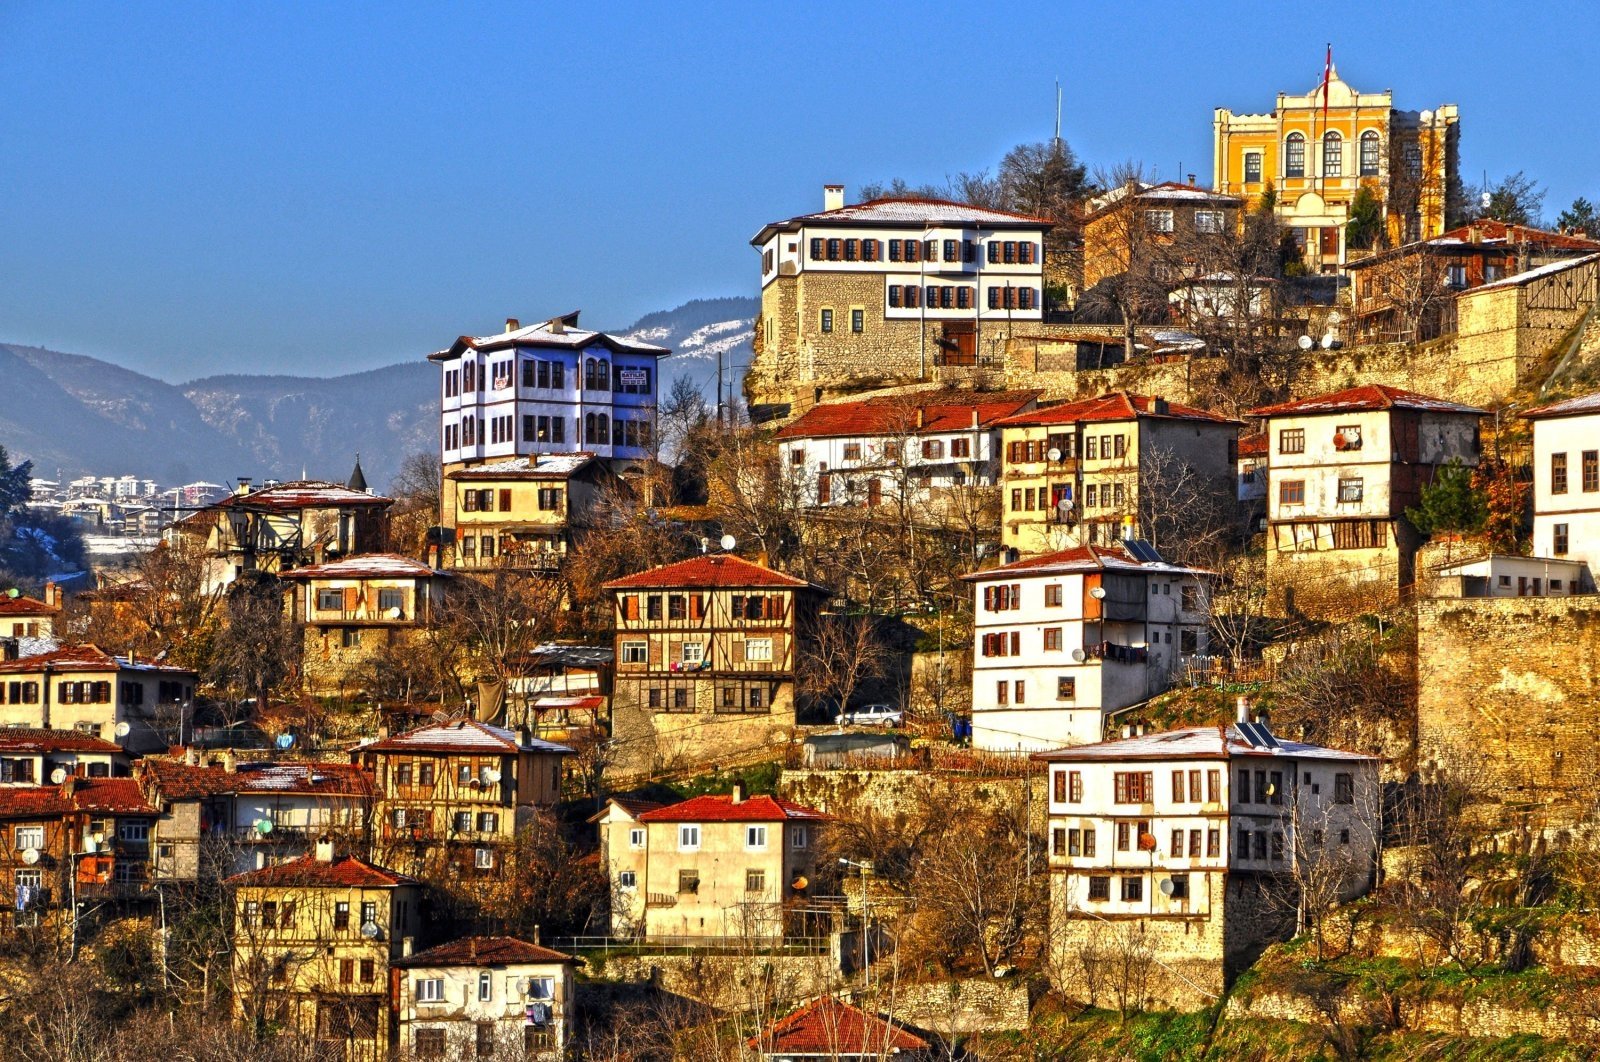 The traditional Ottoman houses create the urban layout of Safranbolu. (Shutterstock Photo)